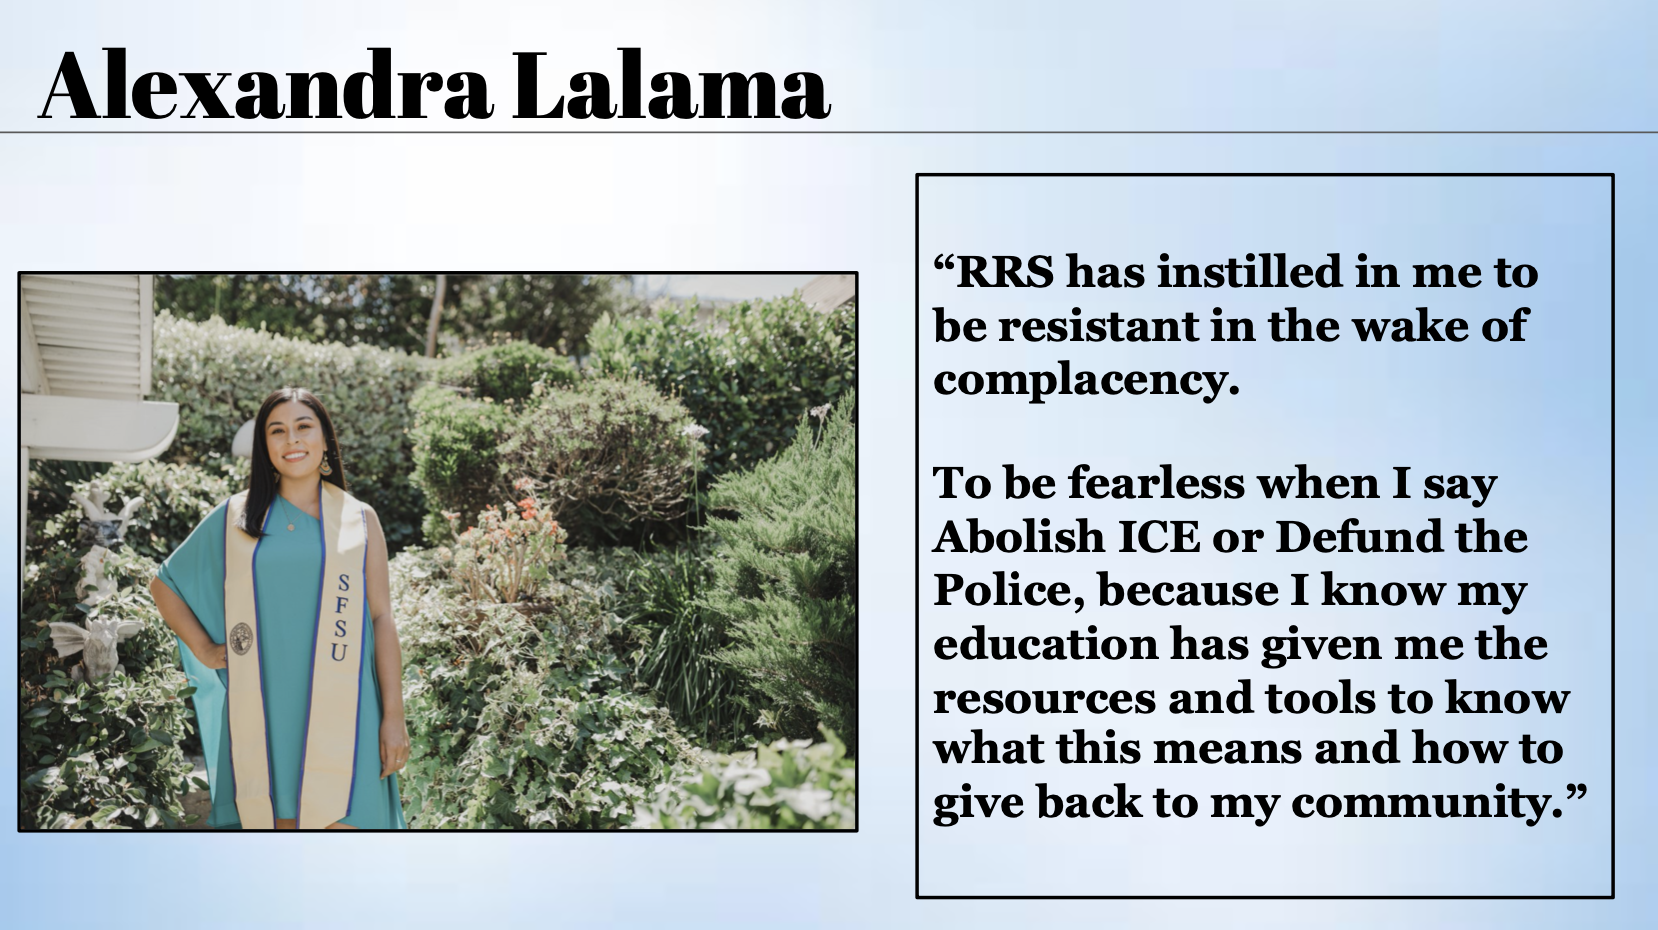 Alexandra Lalama said "RRS has instilled in me to be resistant in the wake of complacency."